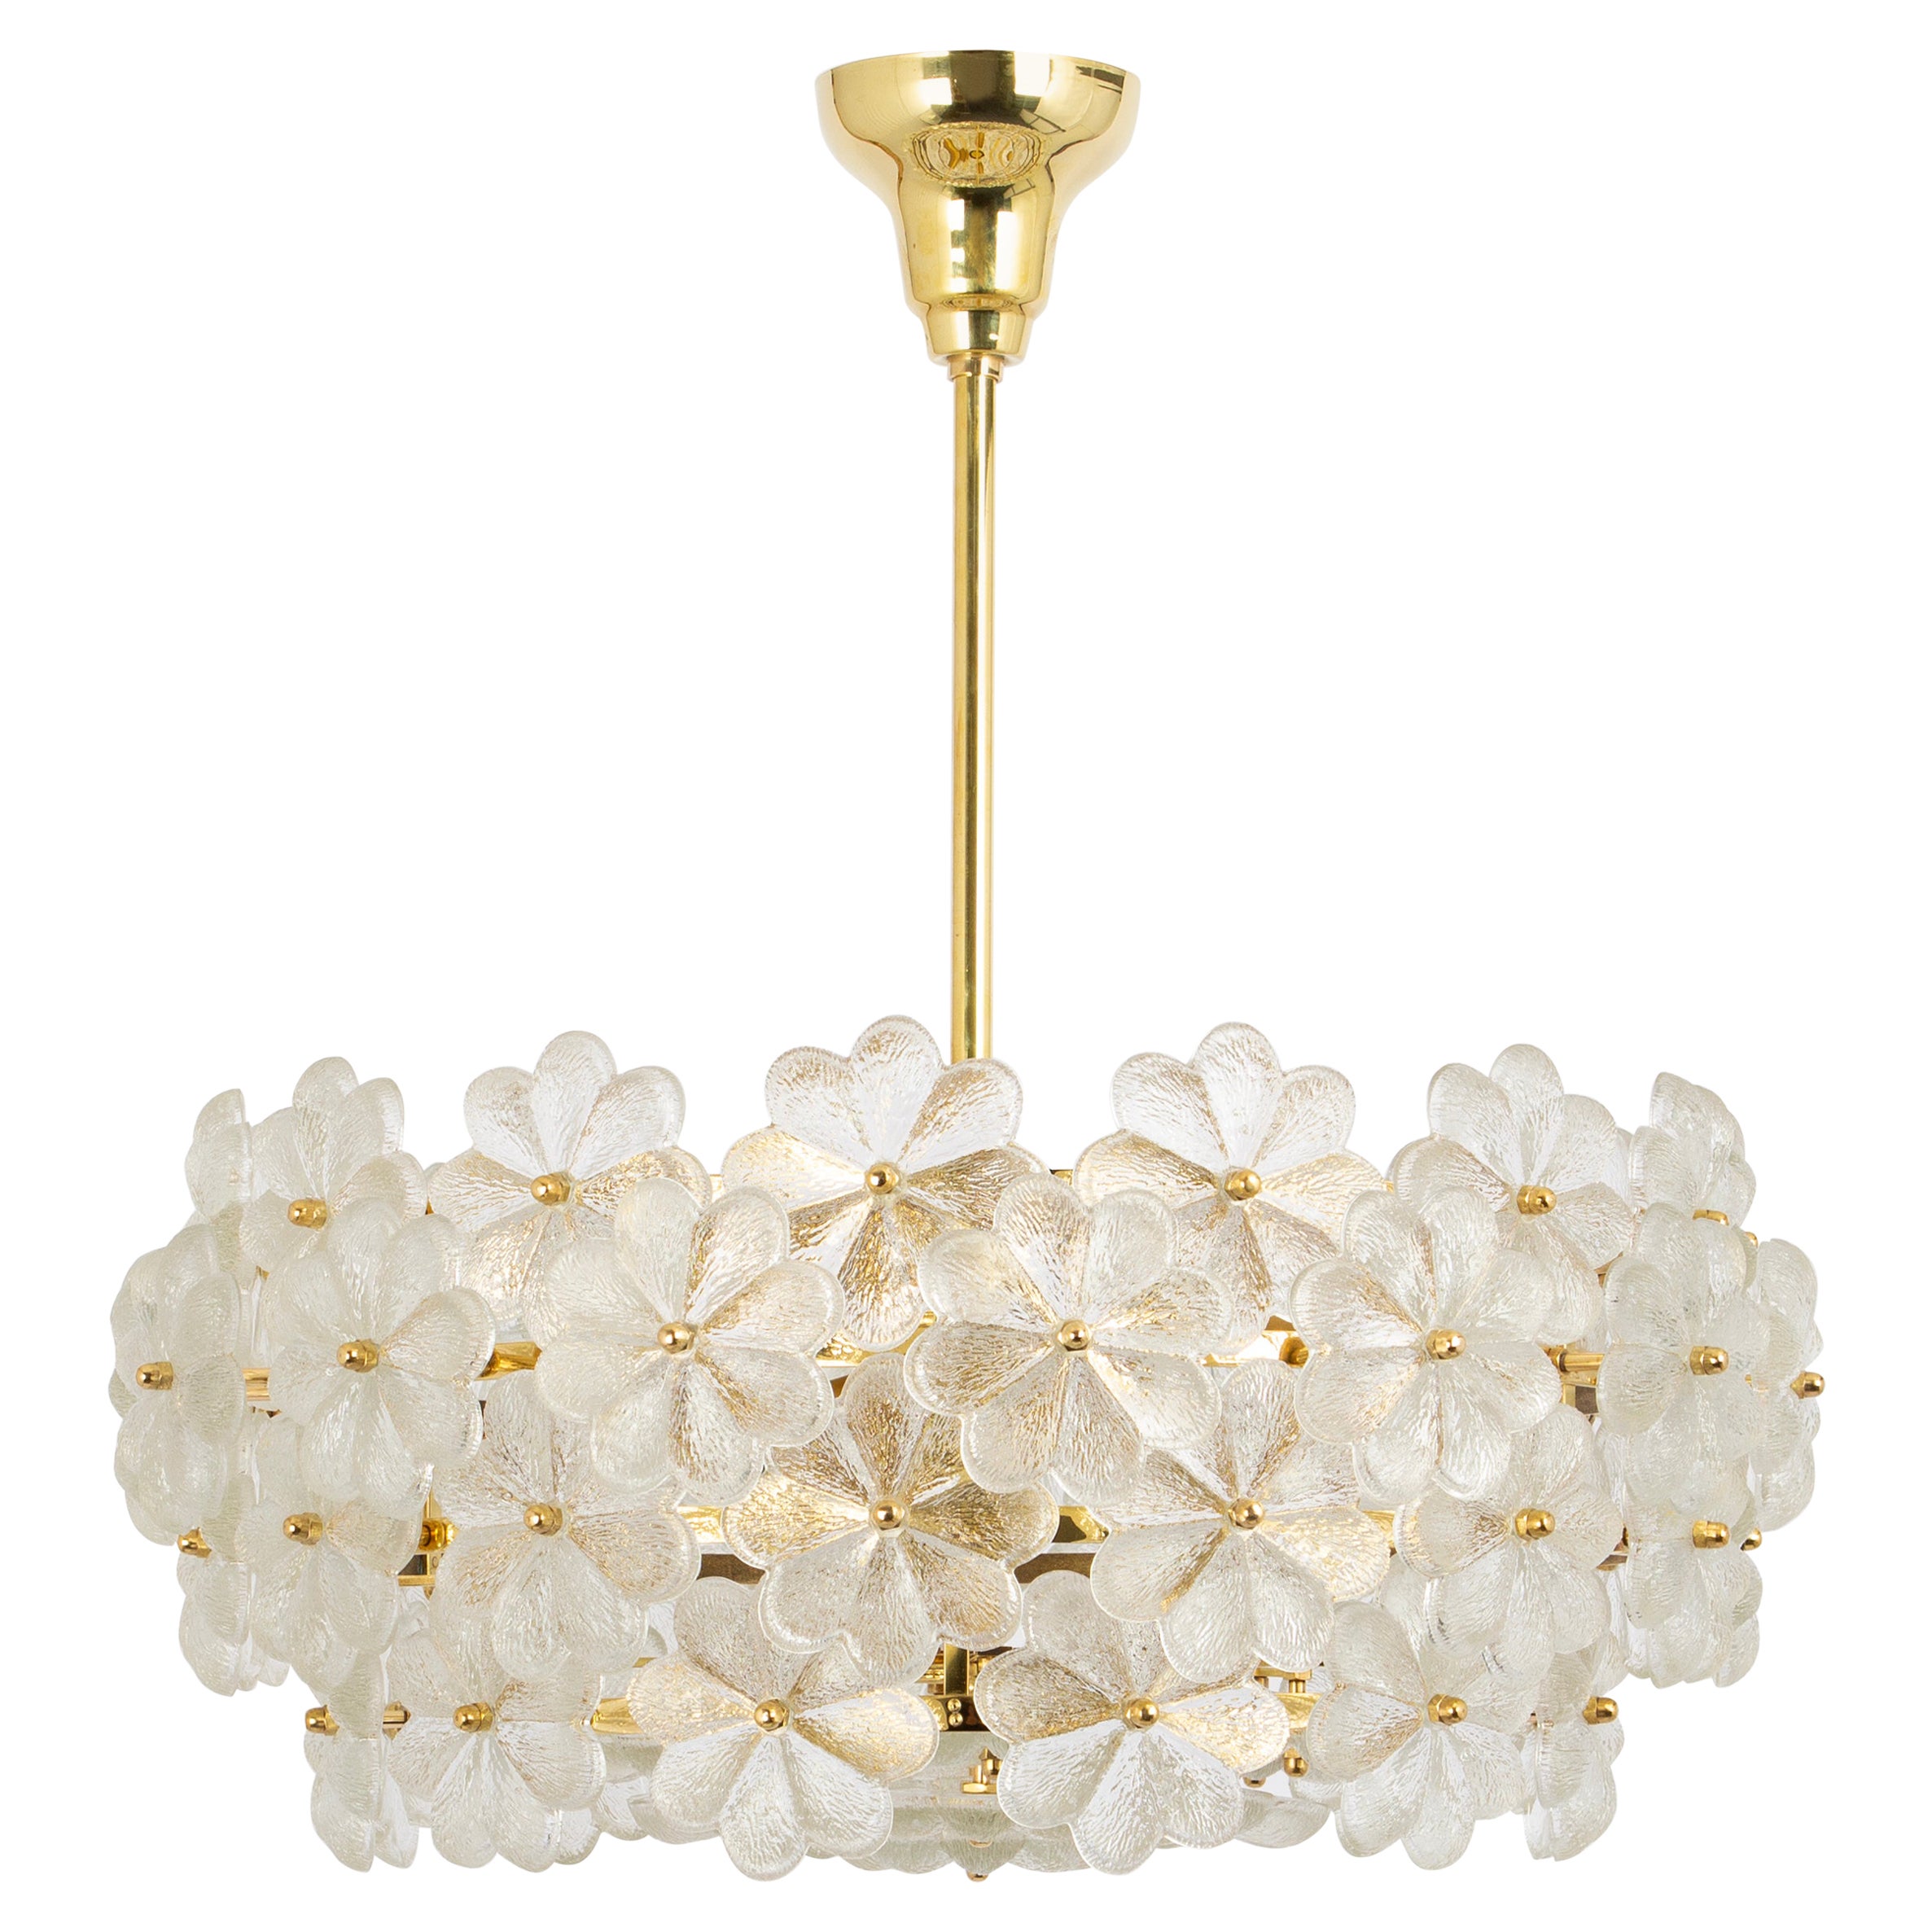 1 of 2 Stunning Murano Glass Chandelier by Ernst Palme, Germany, 1970s For Sale